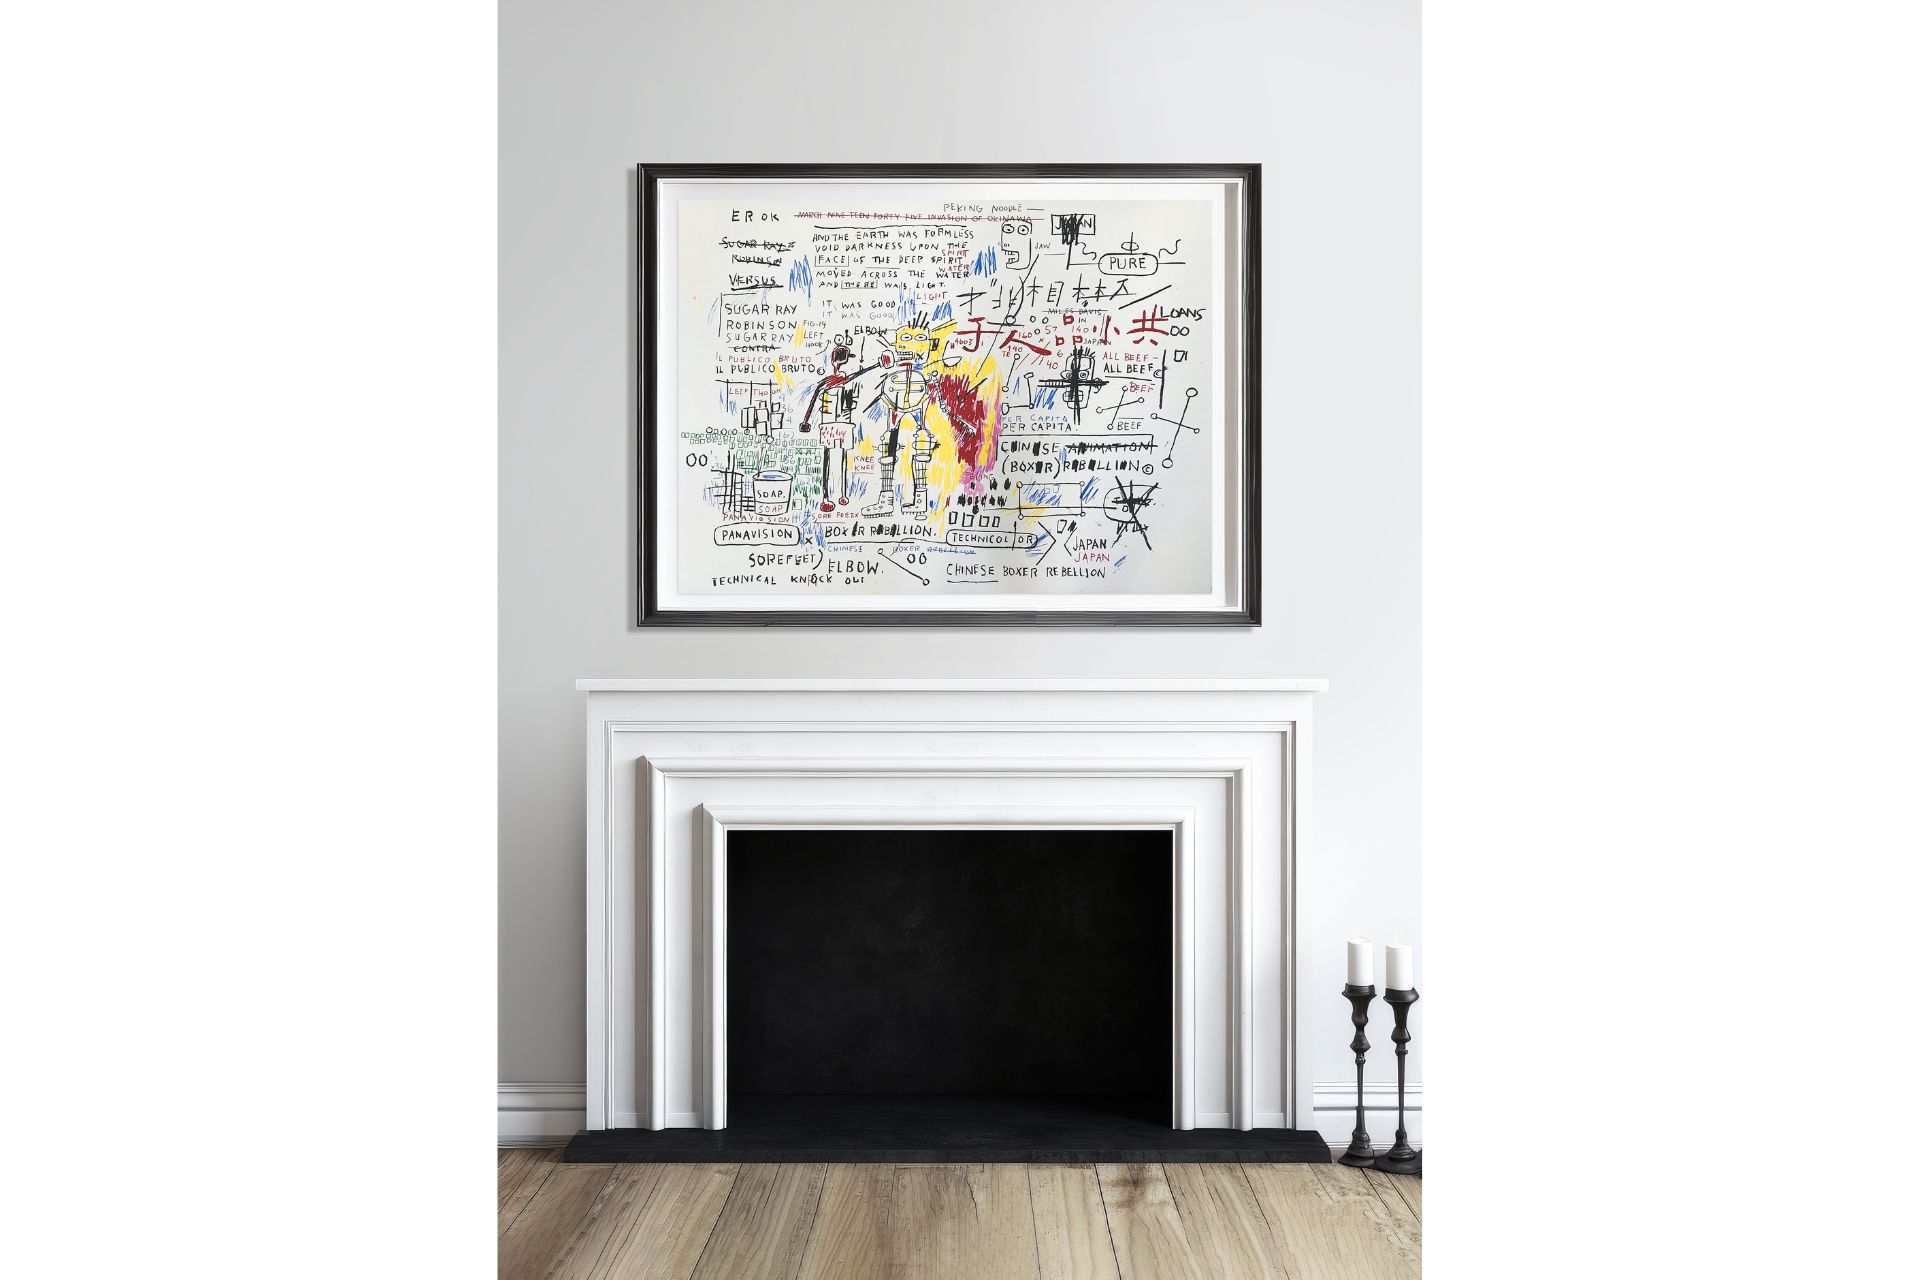 Art by Jean-Michel Basquiat hanging above a fireplace